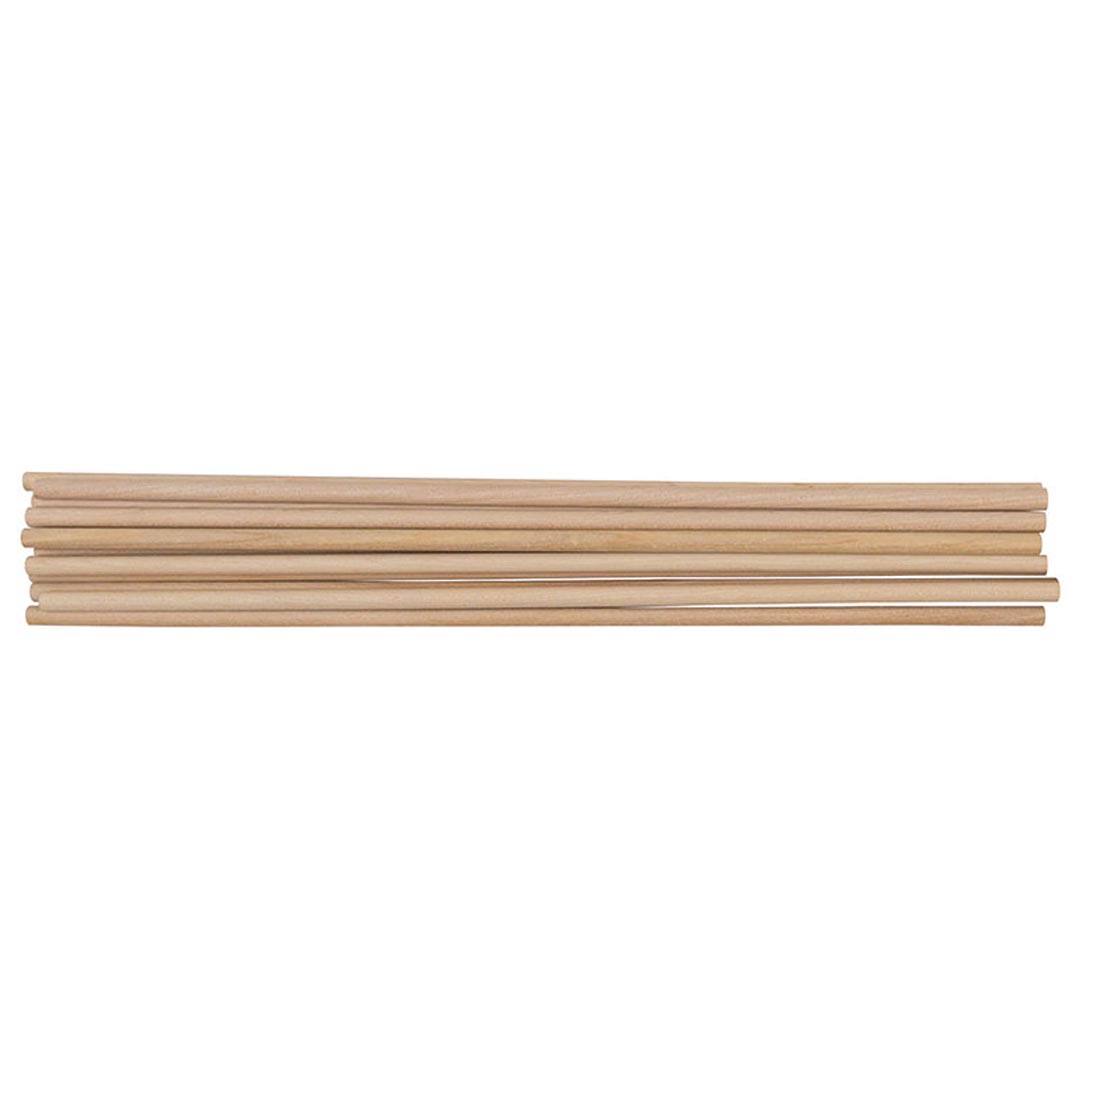 Creativity Street 12" long by 1/4" diameter natural Wooden Dowels, 12-Count